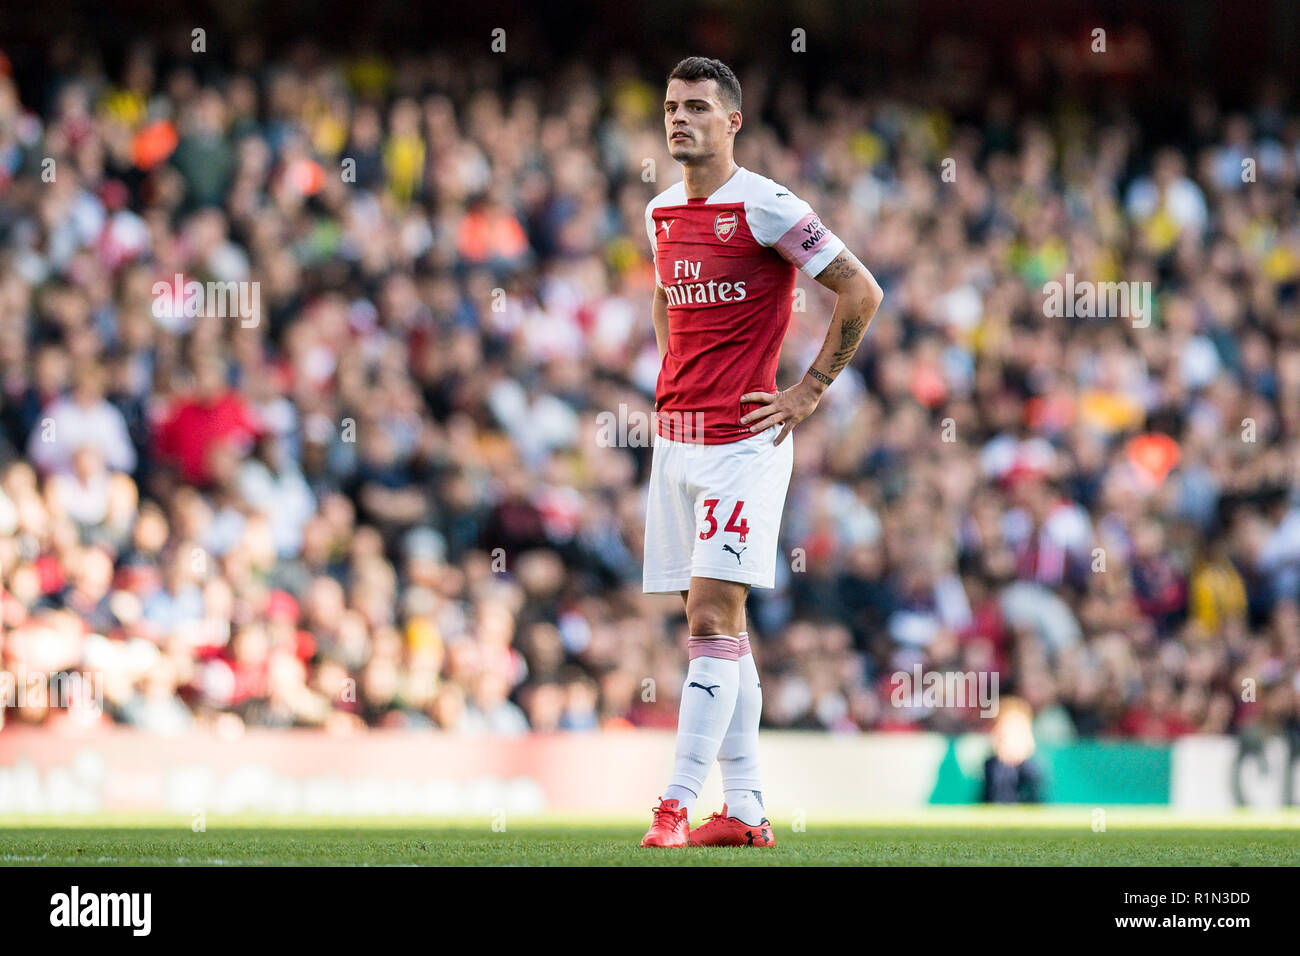 LONDON, ENGLAND - SEPTEMBER 29: Granit Xhaka of Arsenal on during the Premier League match between Arsenal FC and Watford FC at Emirates Stadium on September 29, 2018 in London, United Kingdom. (MB Media) Stock Photo